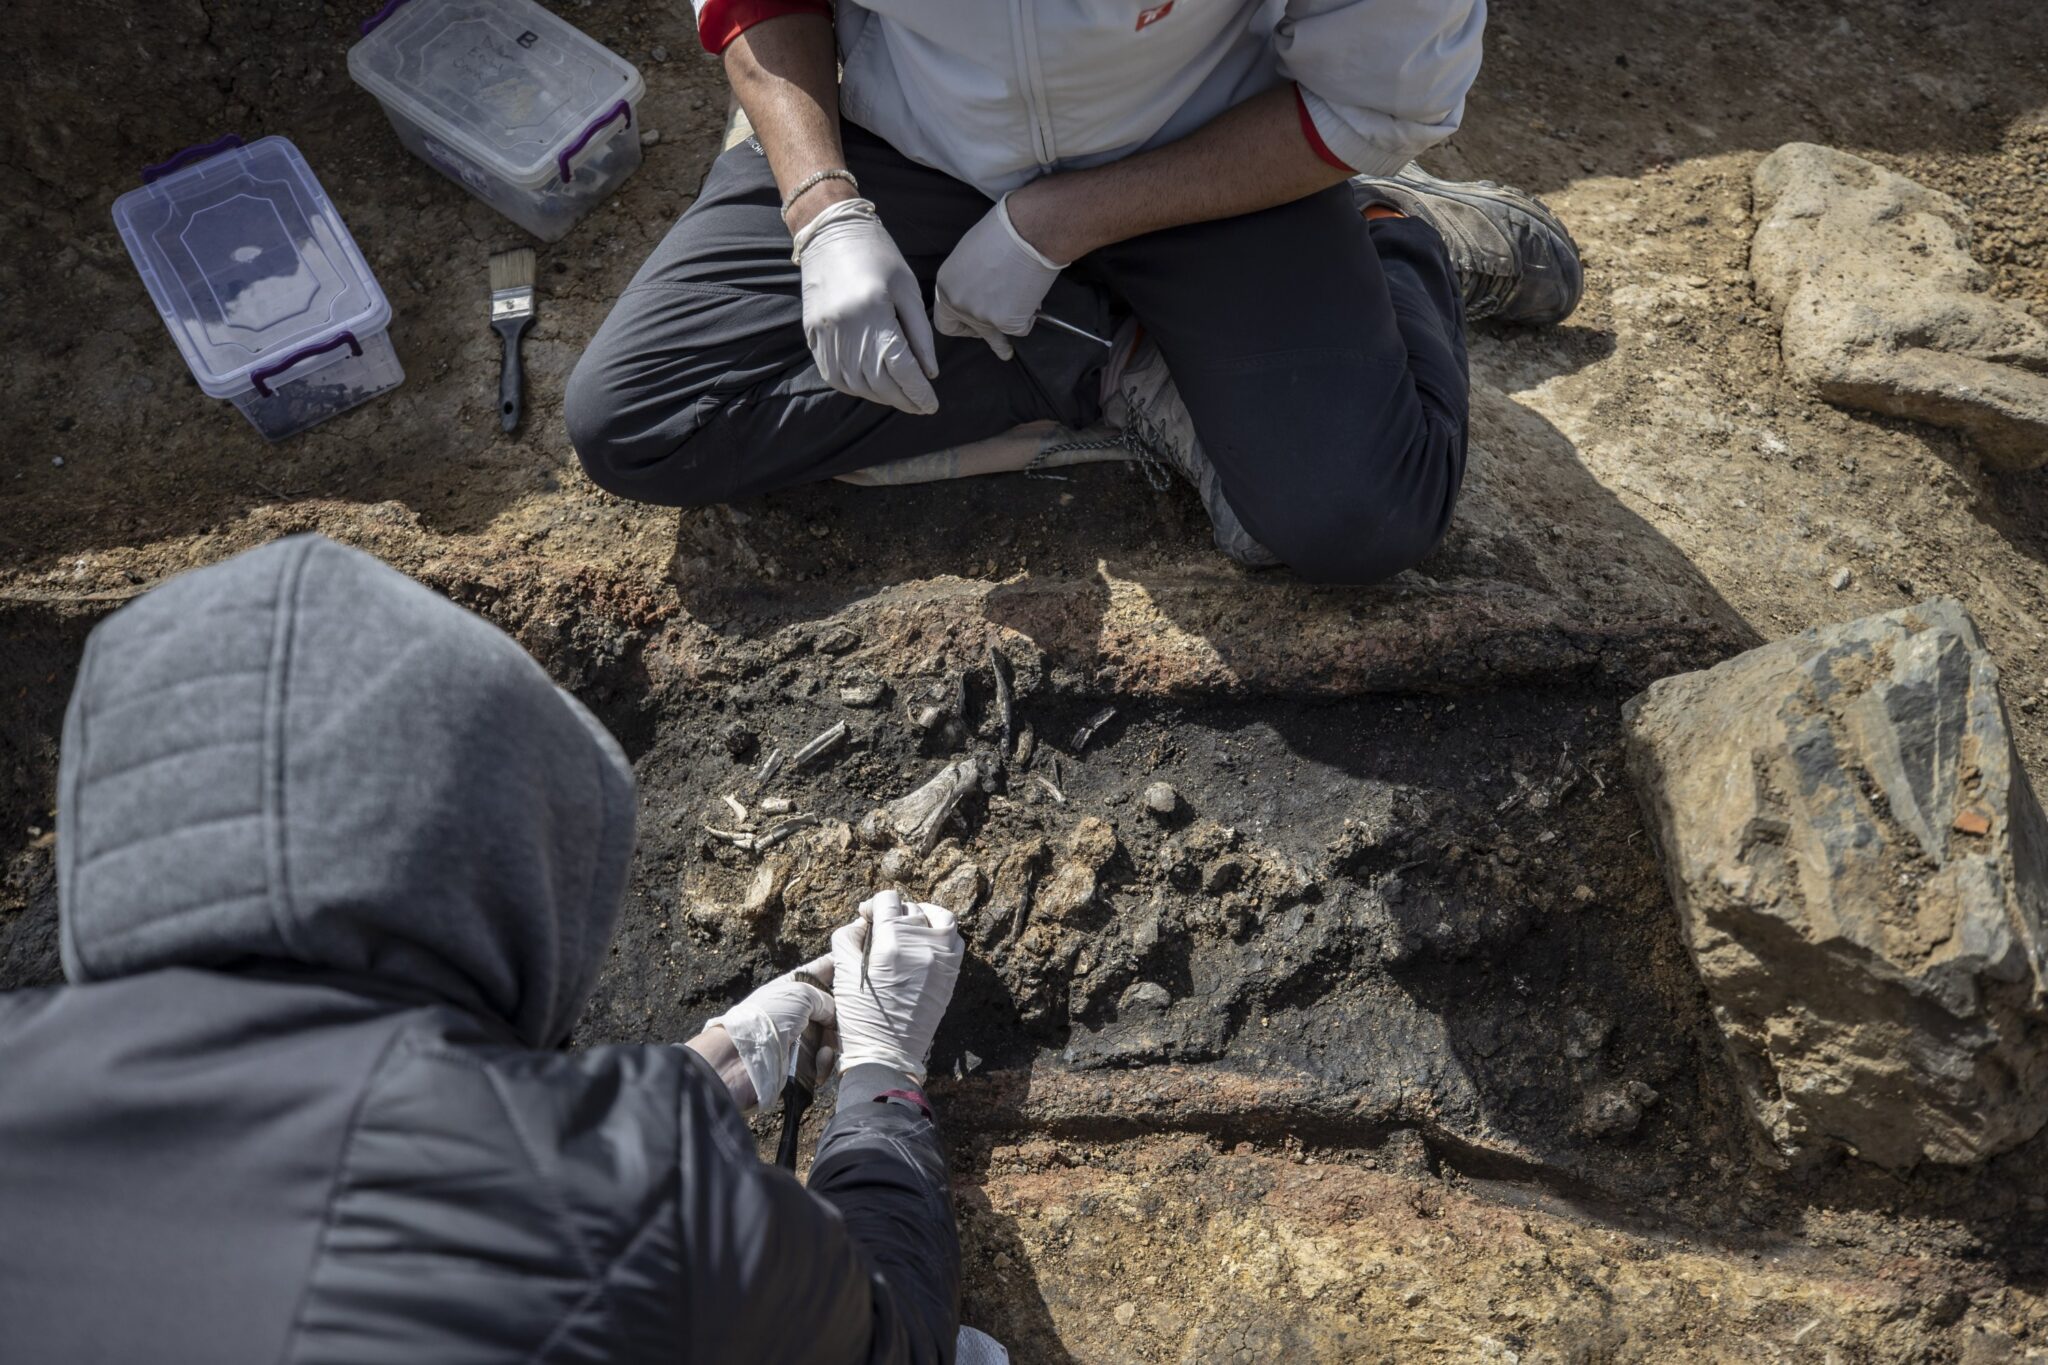 Hellenistic cremation burial found in Istanbul train station